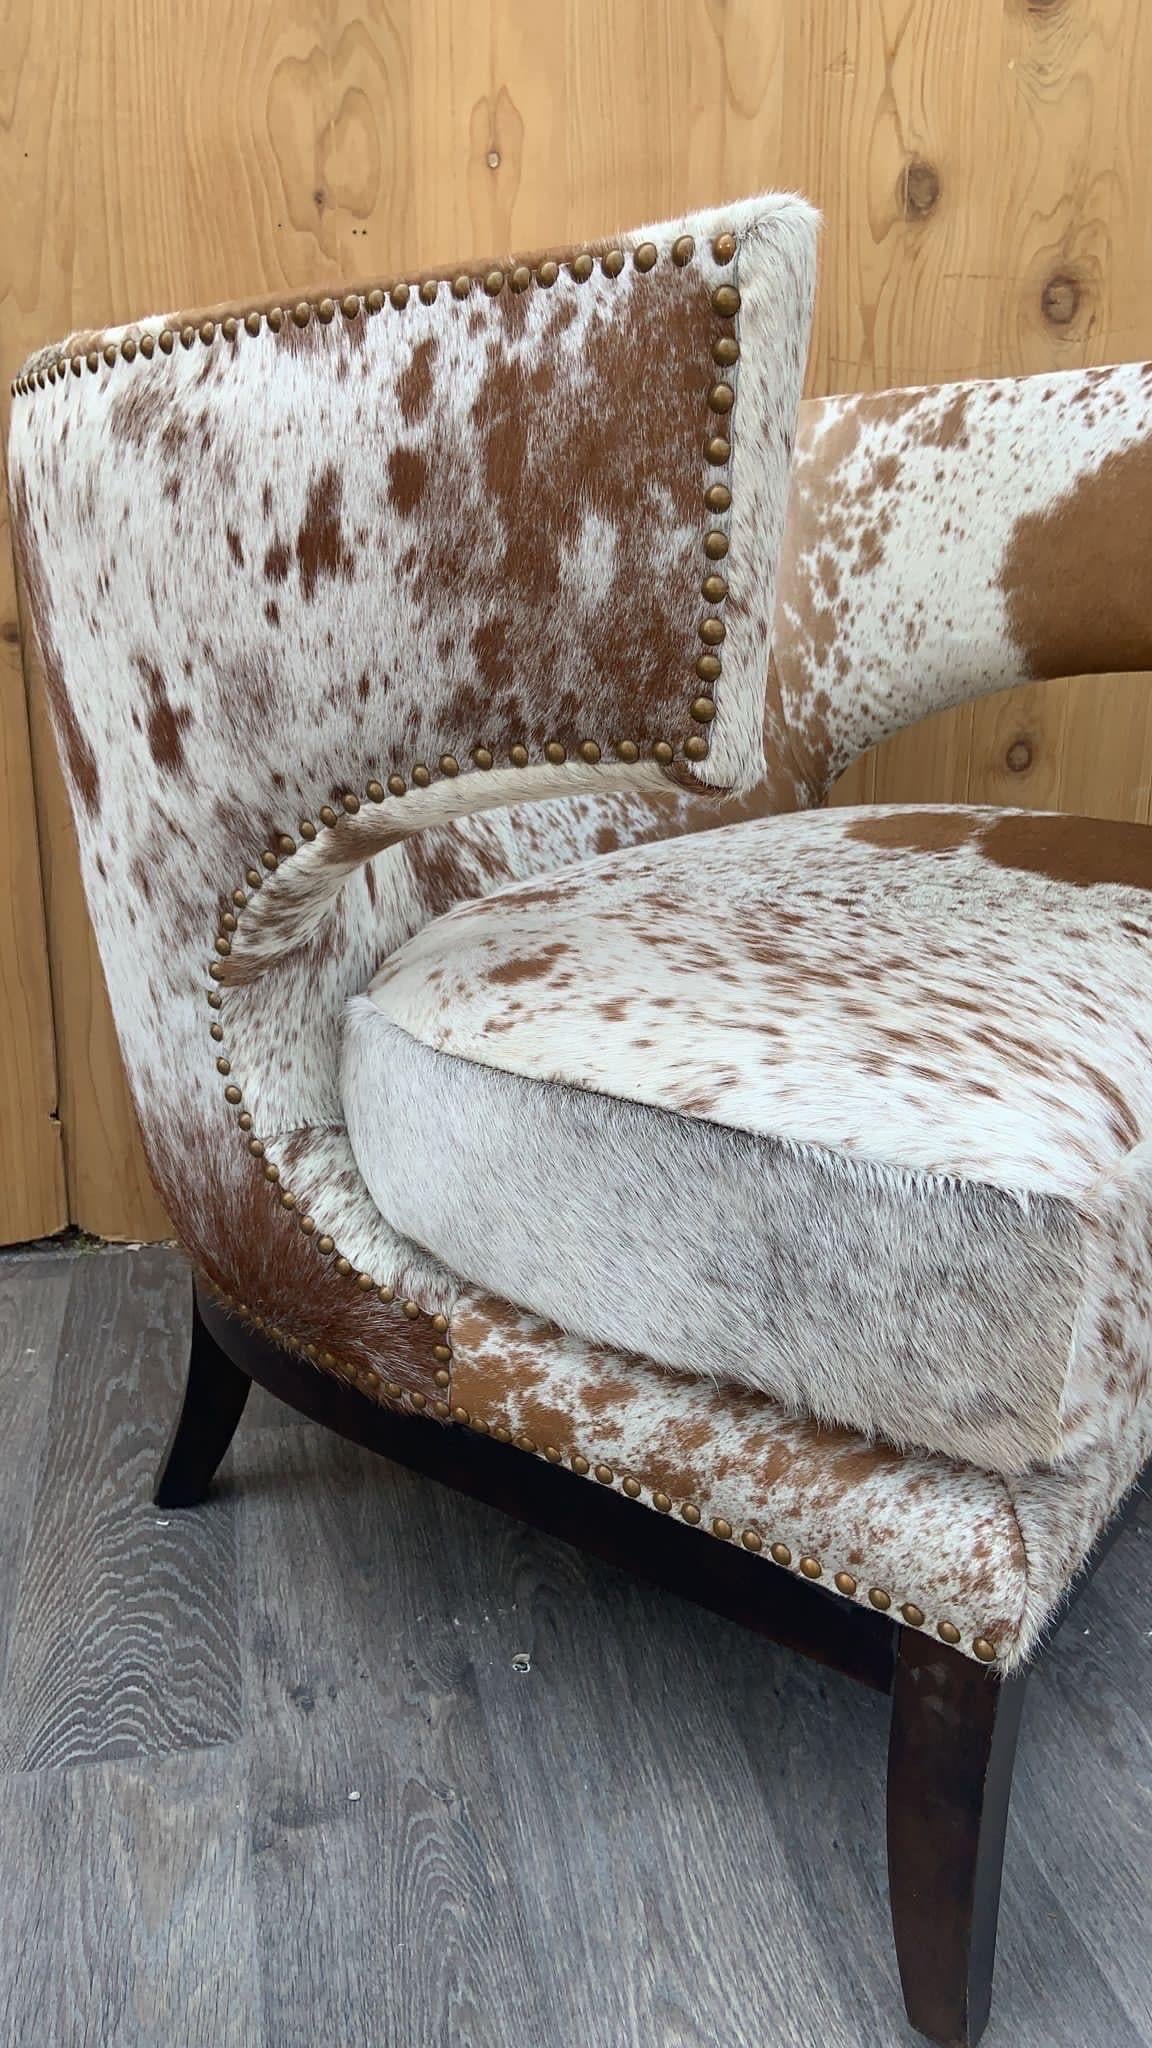 English Horseshoe Savoy Chairs Newly Upholstered in Brazilian Cowhide - Set of 2 6